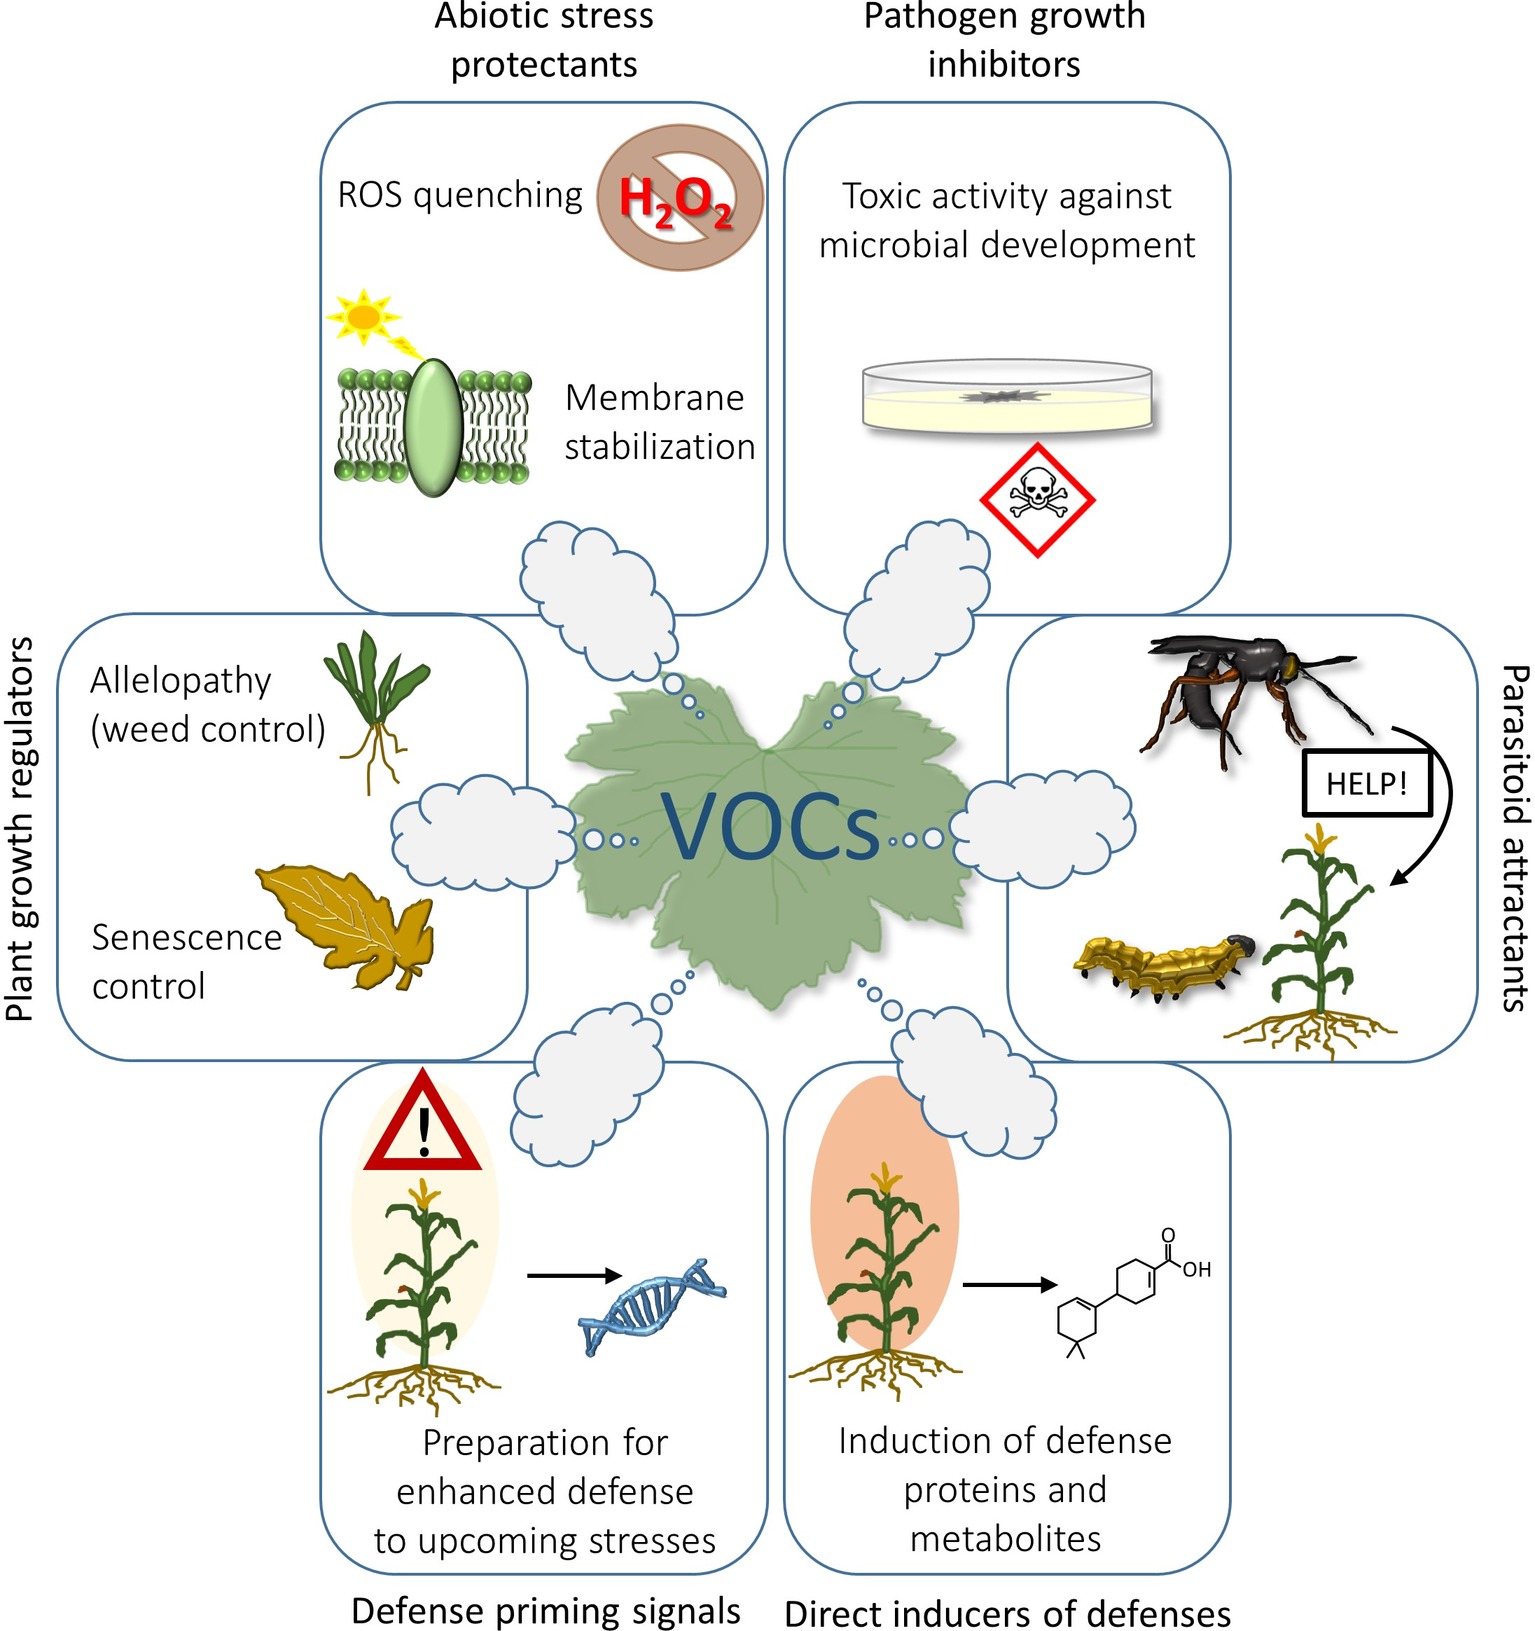 ACP - Variations and sources of volatile organic compounds (VOCs